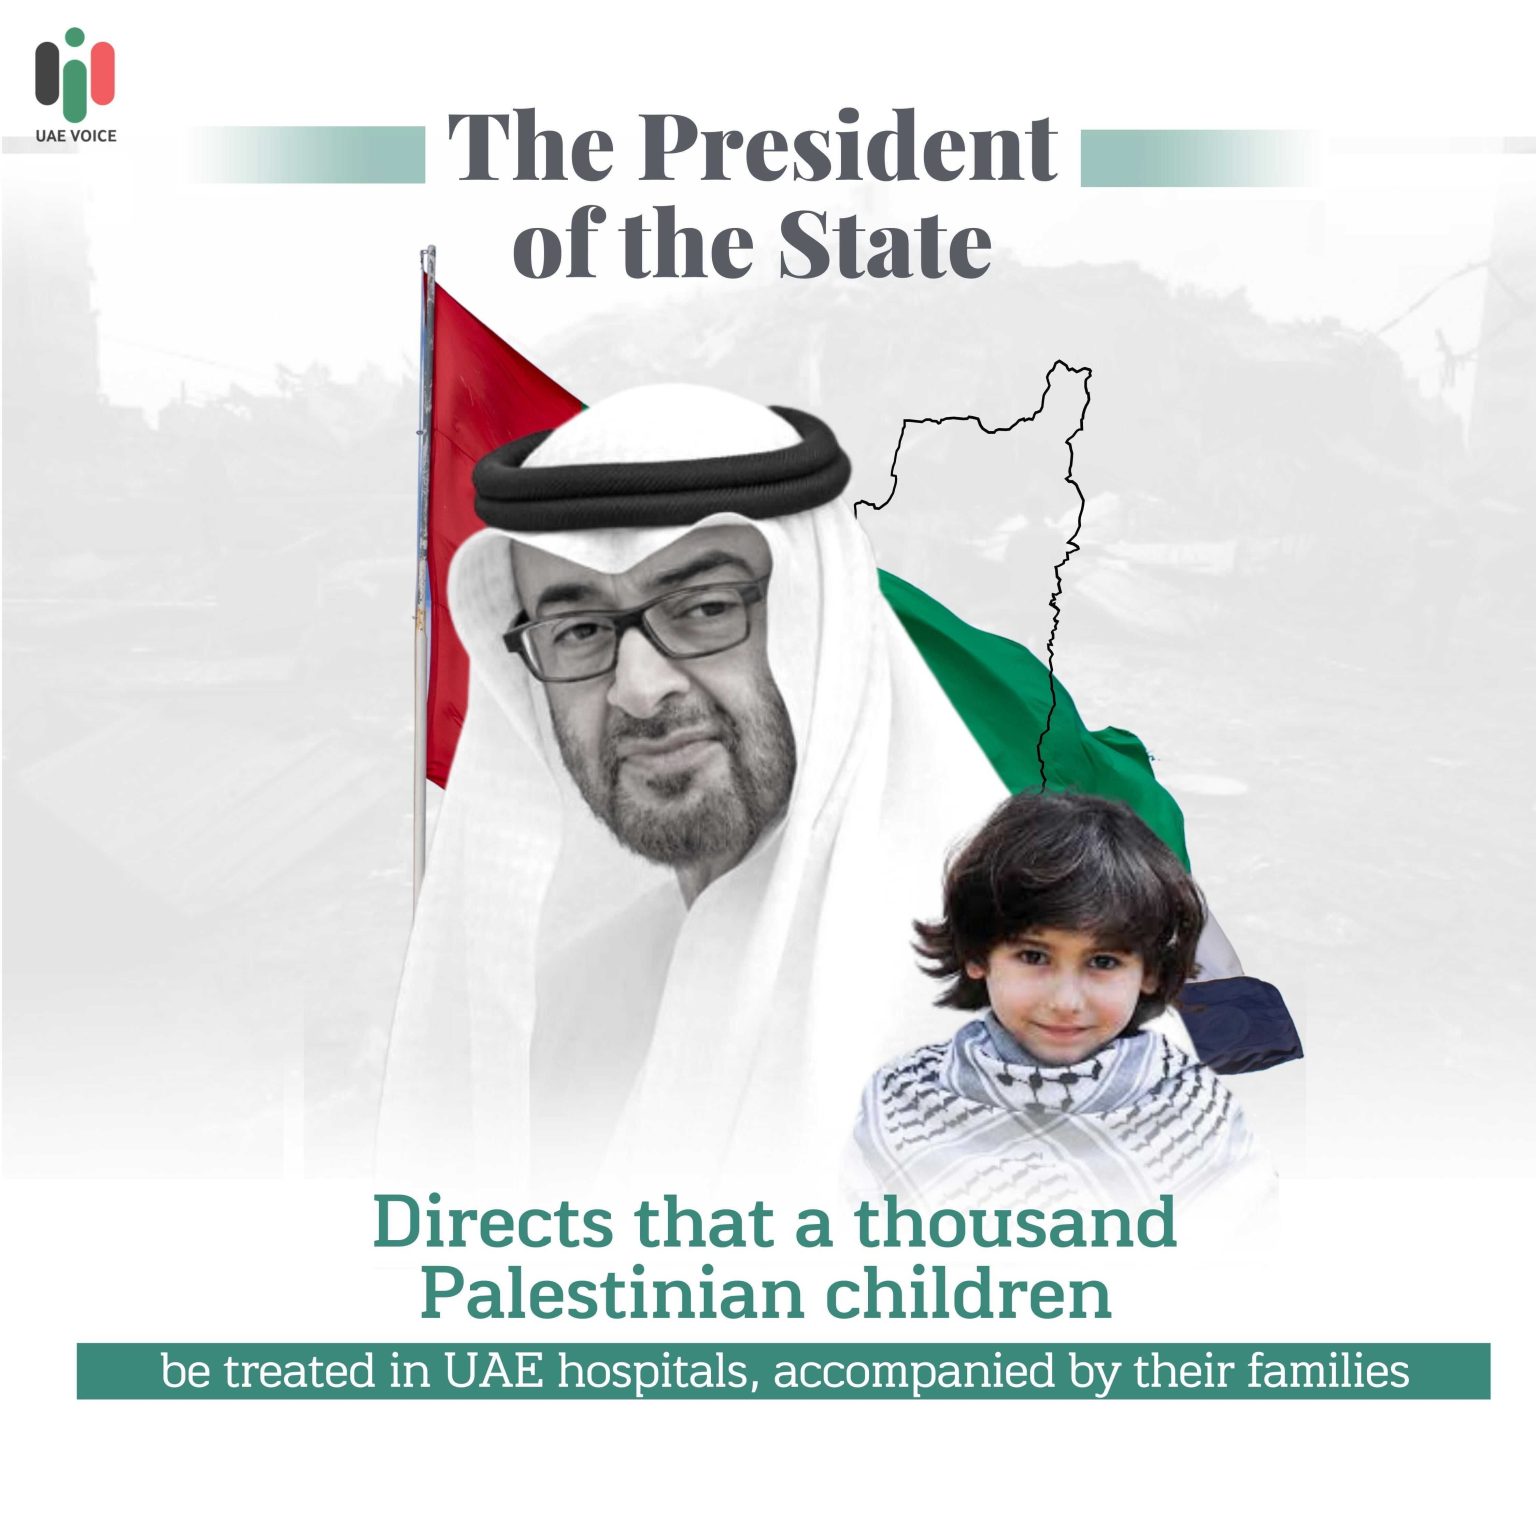 1000 Palestinian Children Will be treated in the UAE.